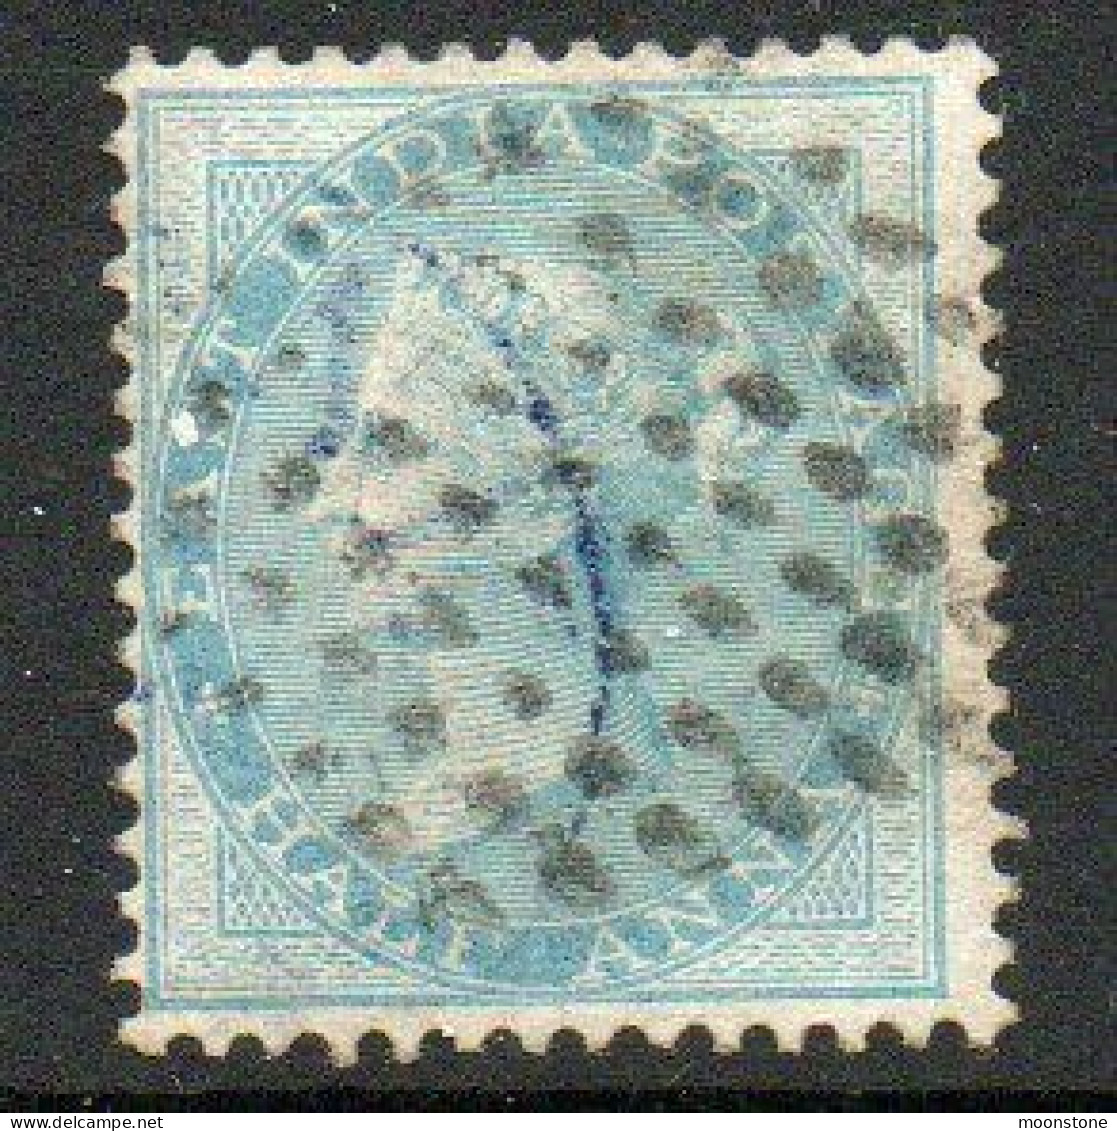 India 1865 ½ Anna Pale Blue, Wmk. Elephant Head, Perf. 14, Used, SG 55 (E) - 1854 Britse Indische Compagnie